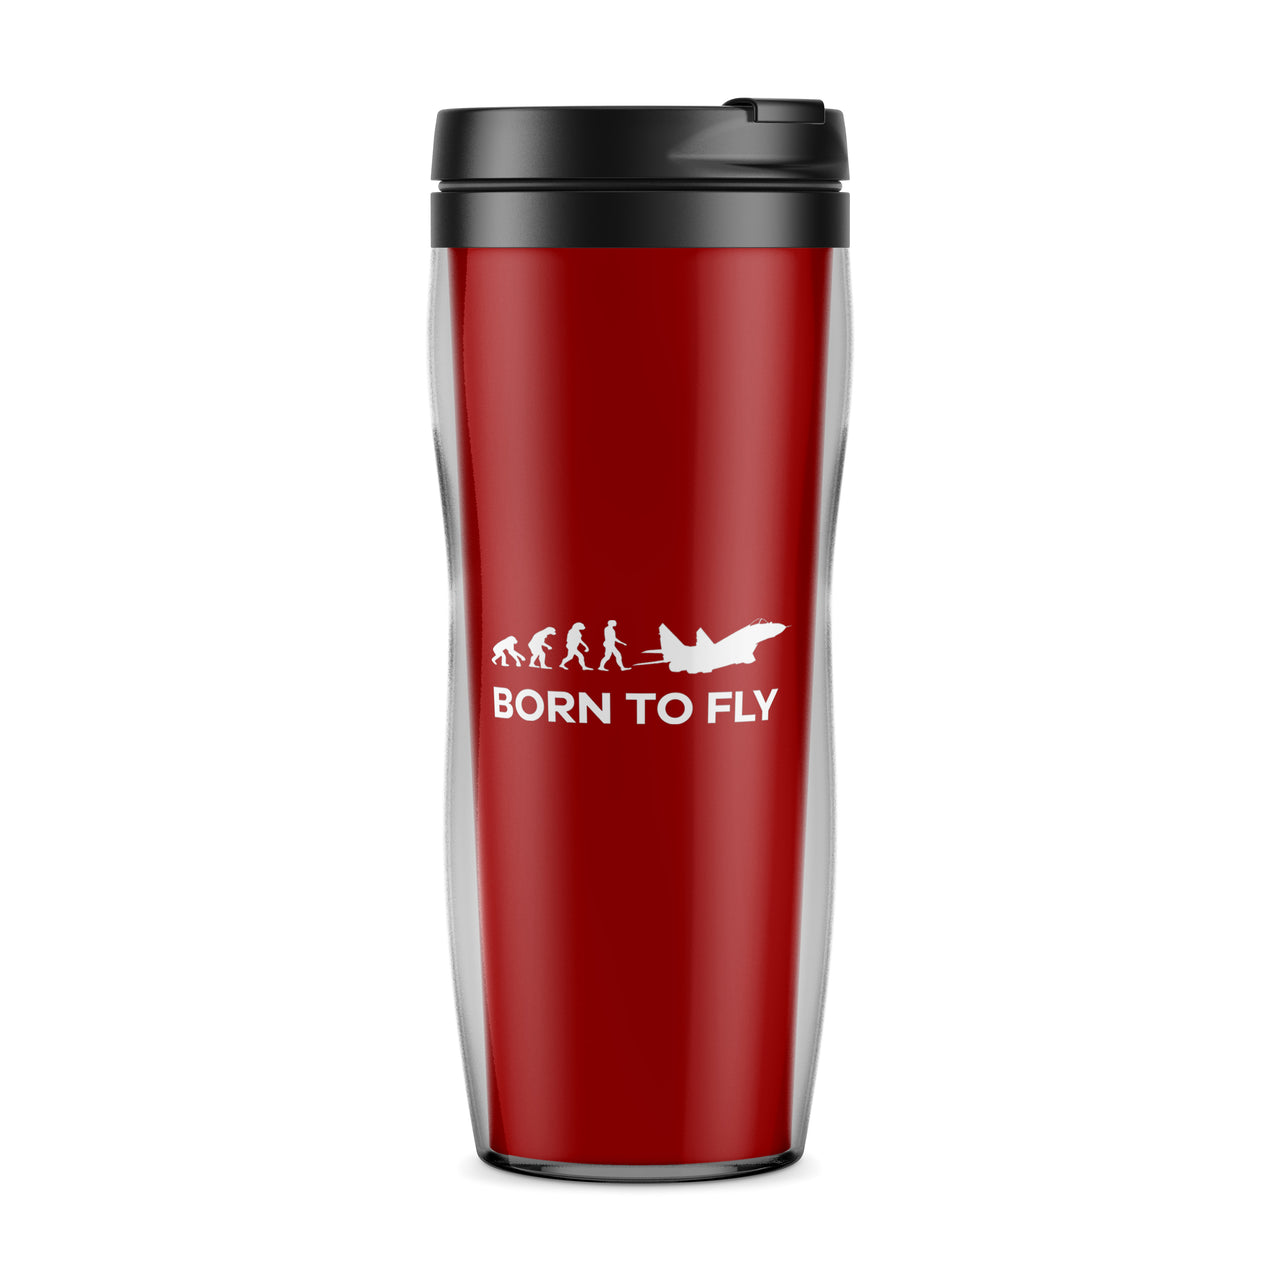 Born To Fly Military Designed Travel Mugs